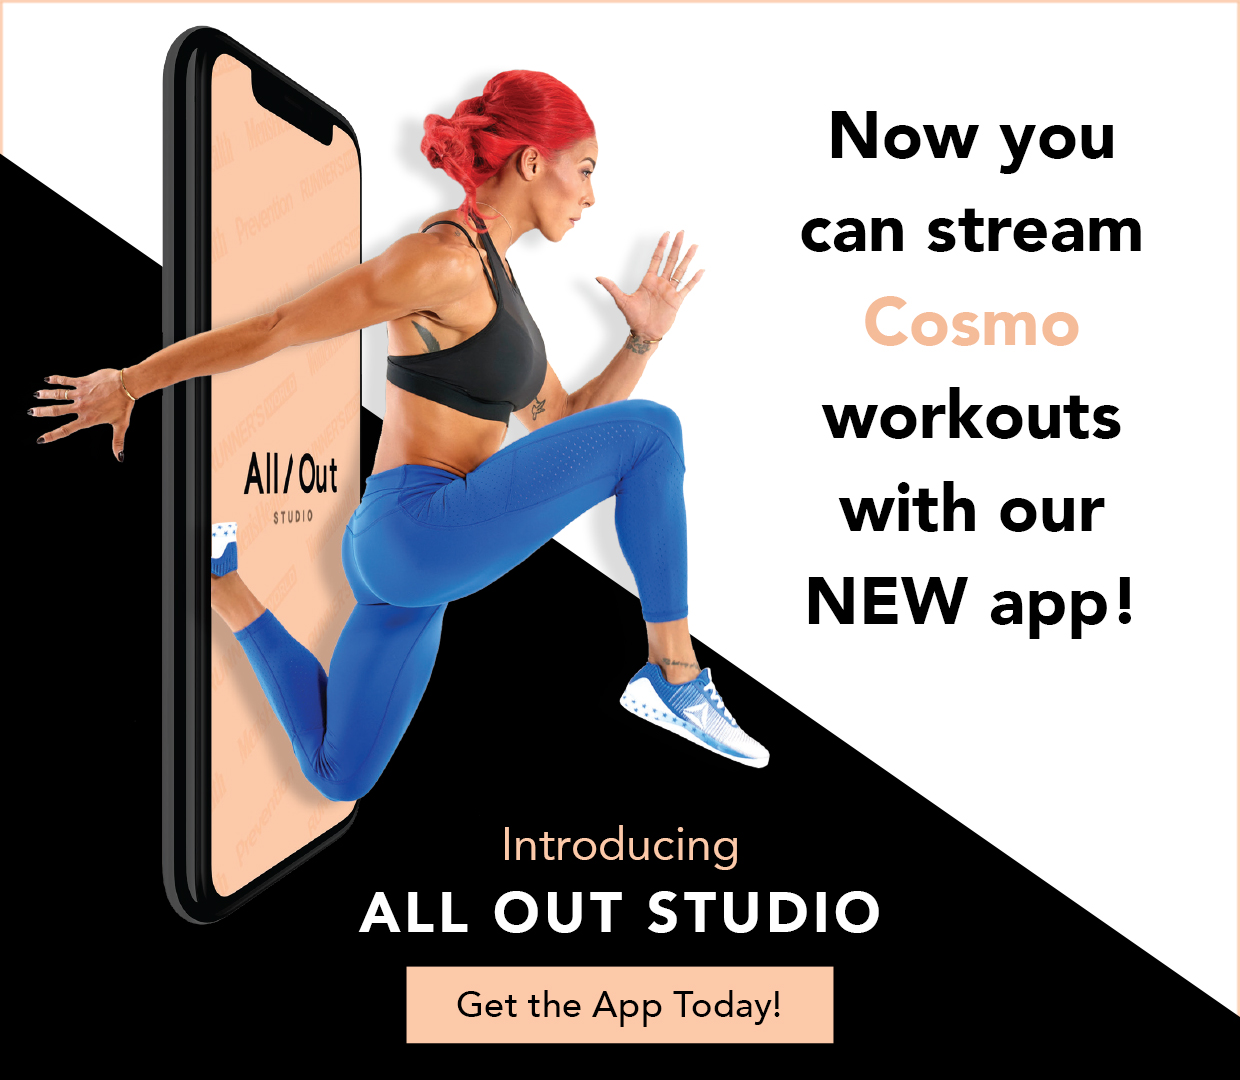 Introducing All Out Studio! Get hundreds of on-demand workout classes with certified trainers. 